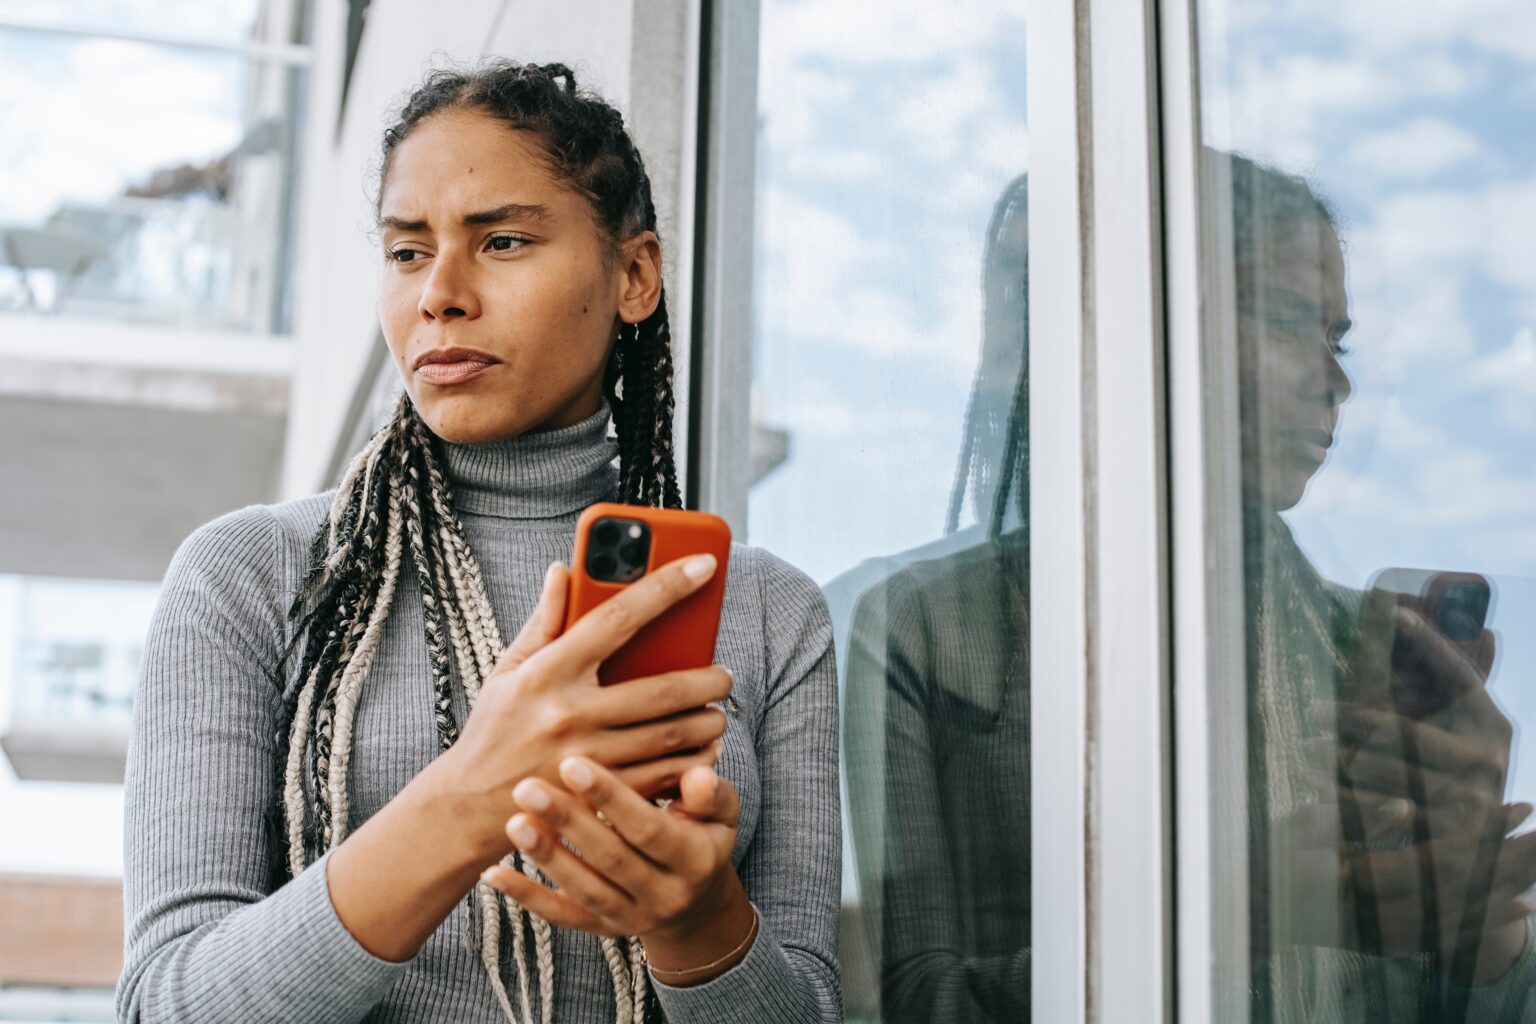 African American woman stands near window, holding smart phone in hands